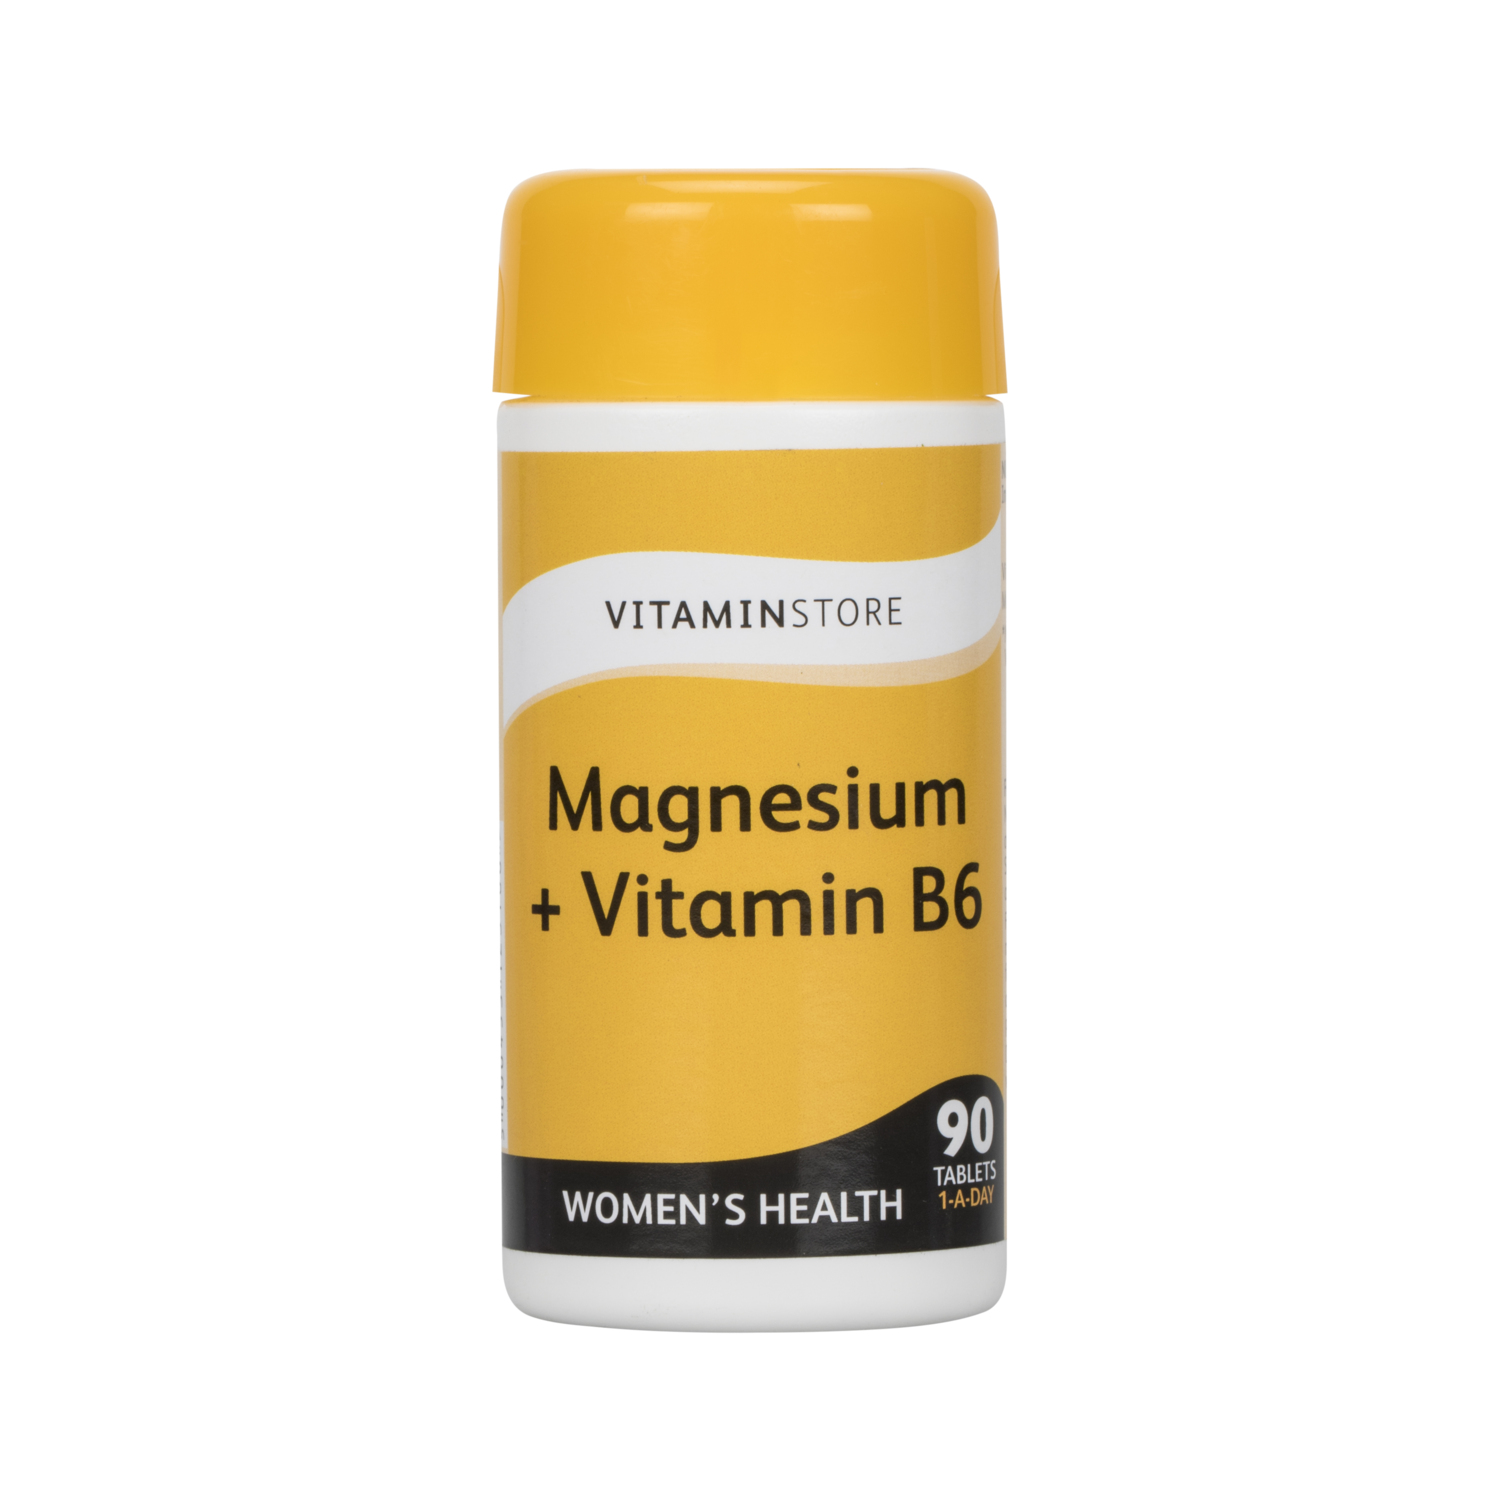 Vitamin Store Magnesium and B6 Tablets Image